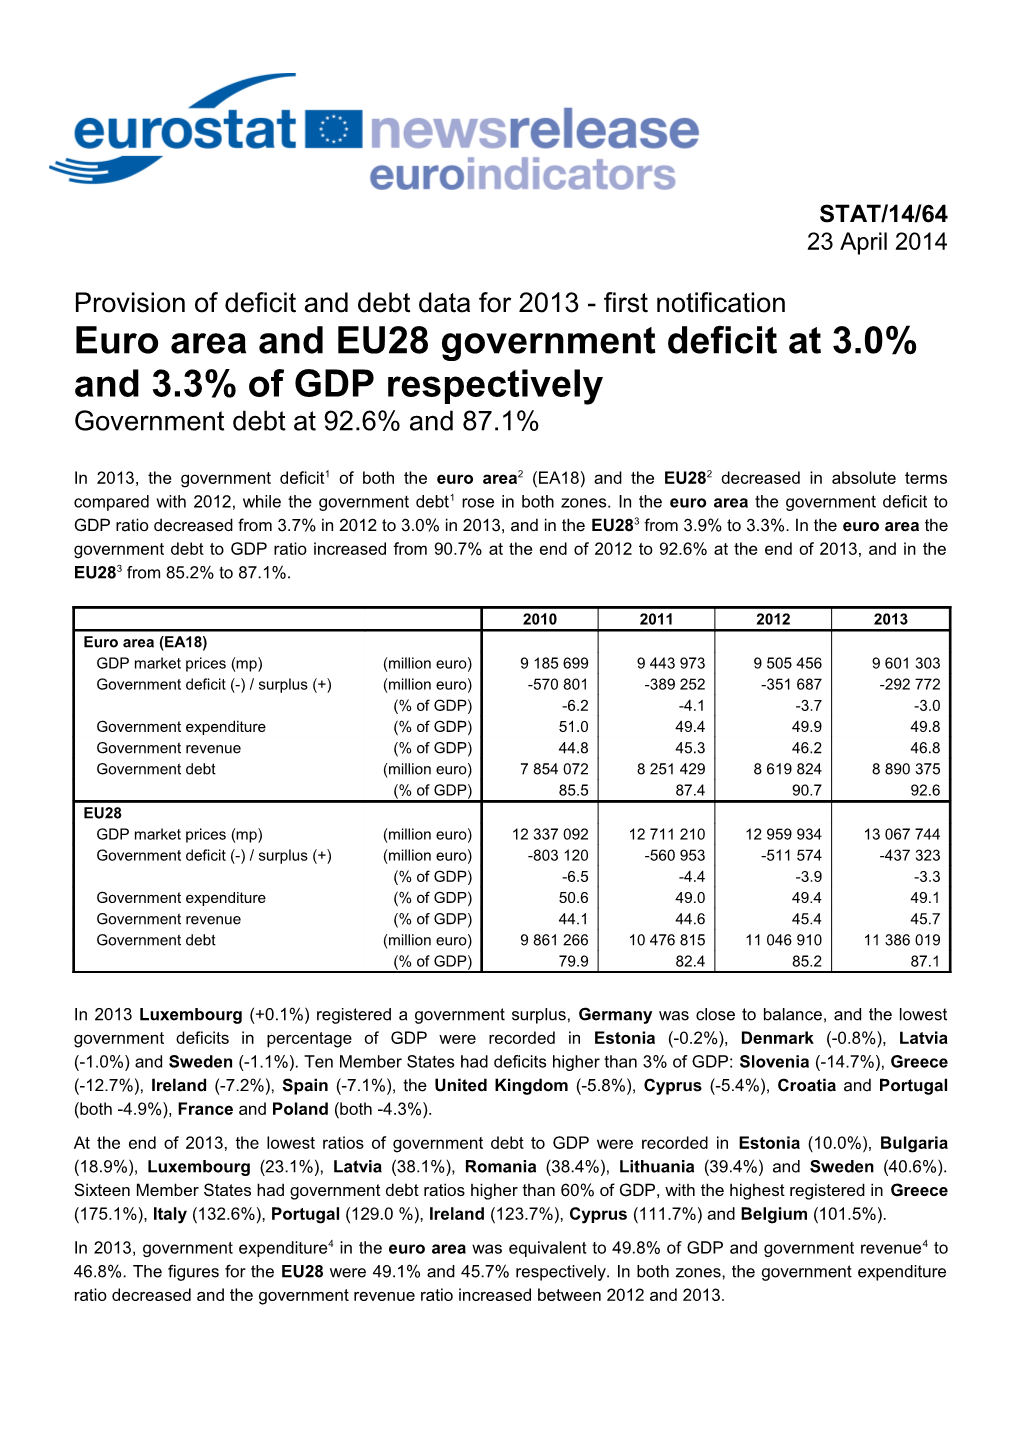 Euro Area and EU28 Government Deficit At3.0% and 3.3% of GDP Respectively